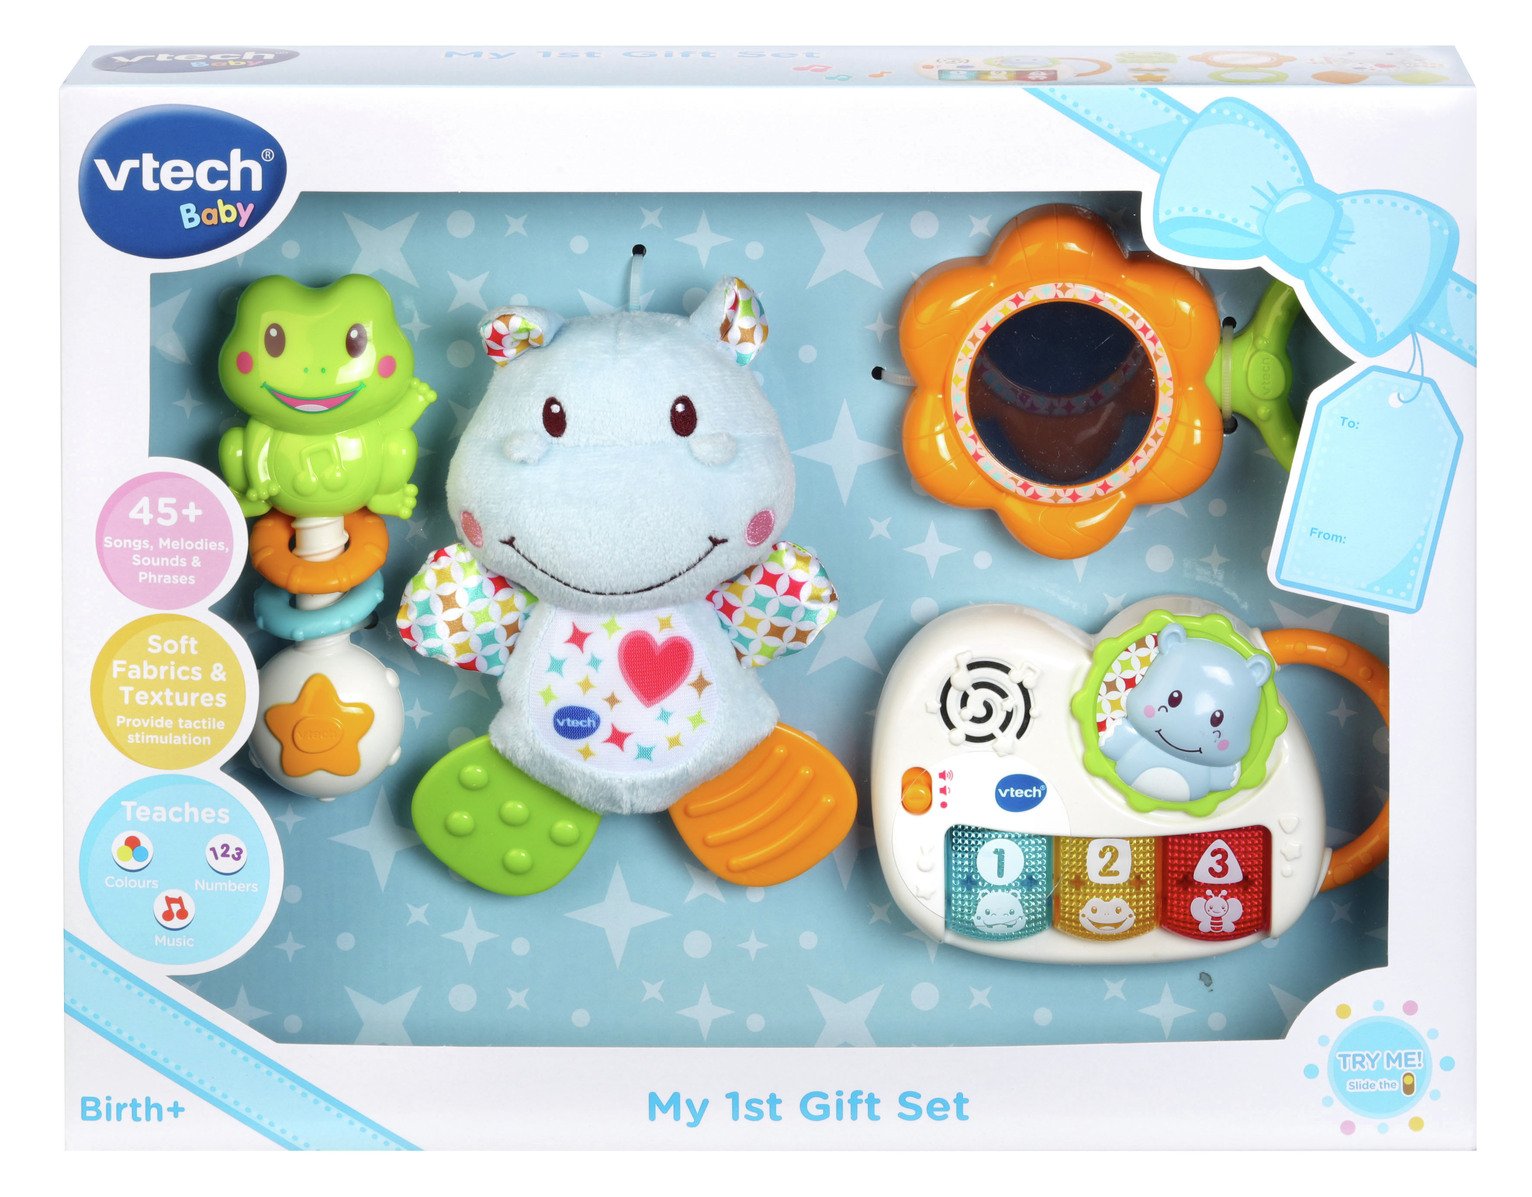 VTech Baby My 1st Gift Set Review